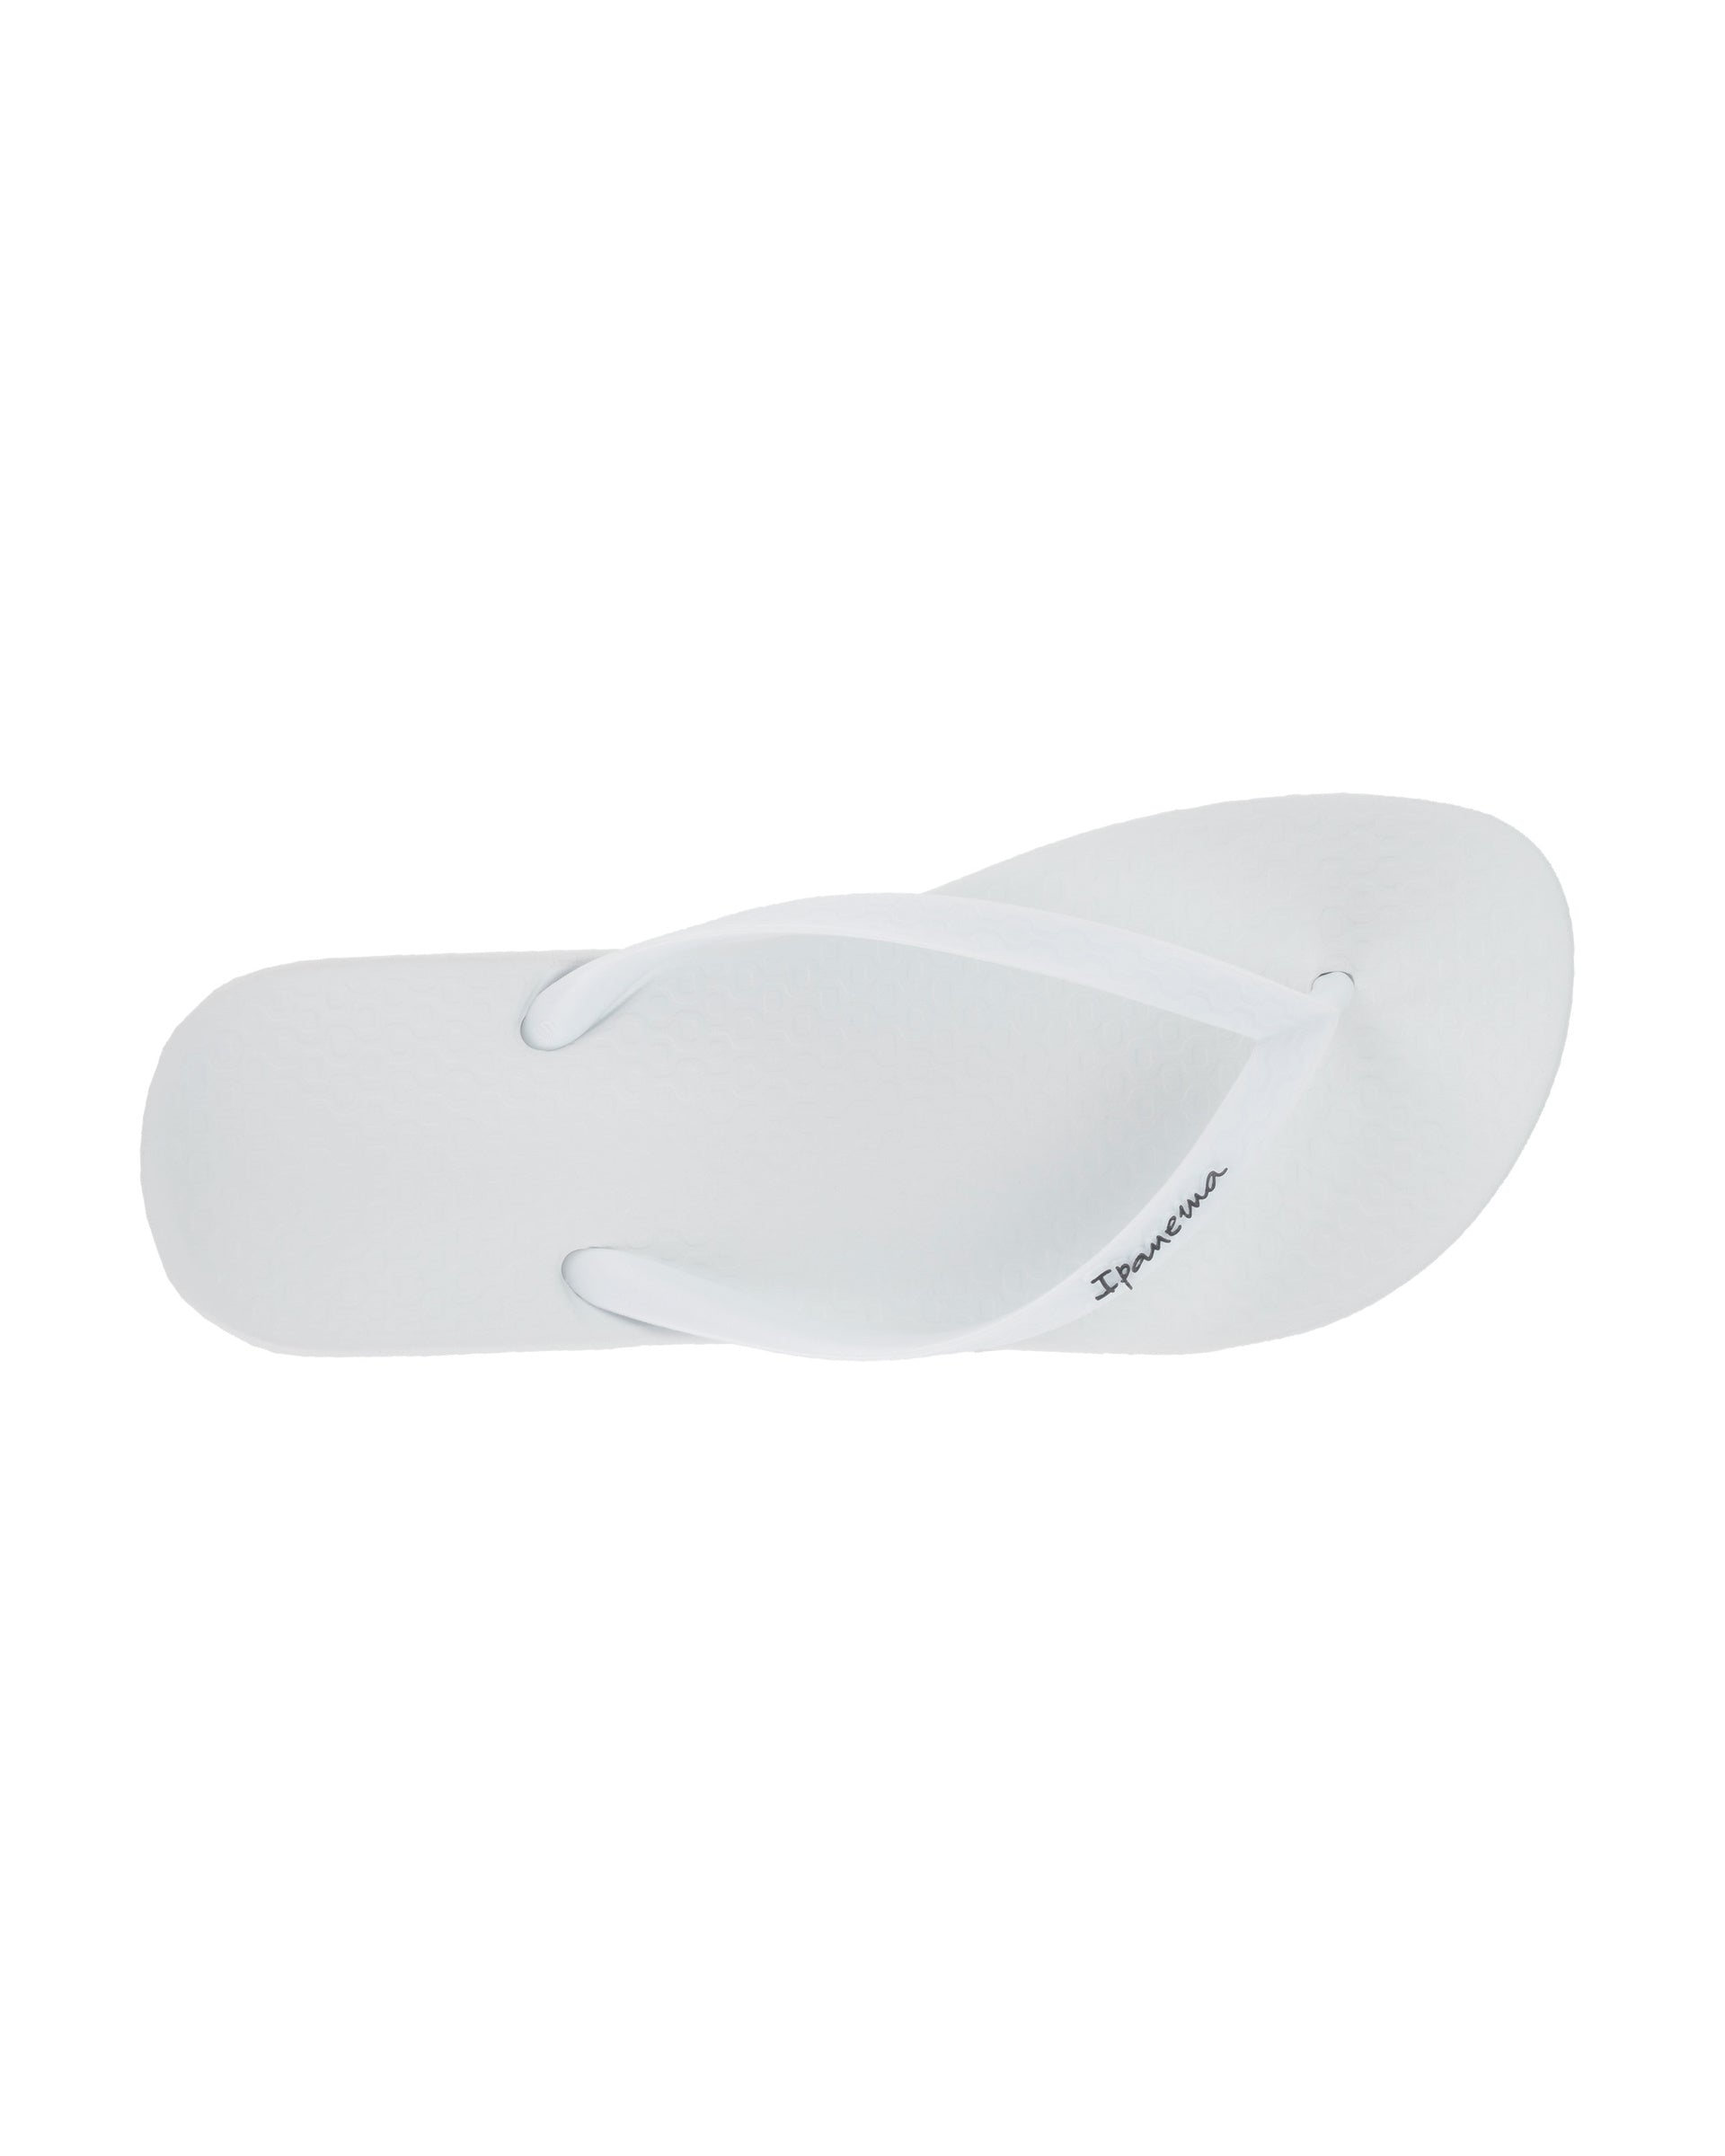 Top view of a white Ipanema Ana Colors woman's Flip Flops